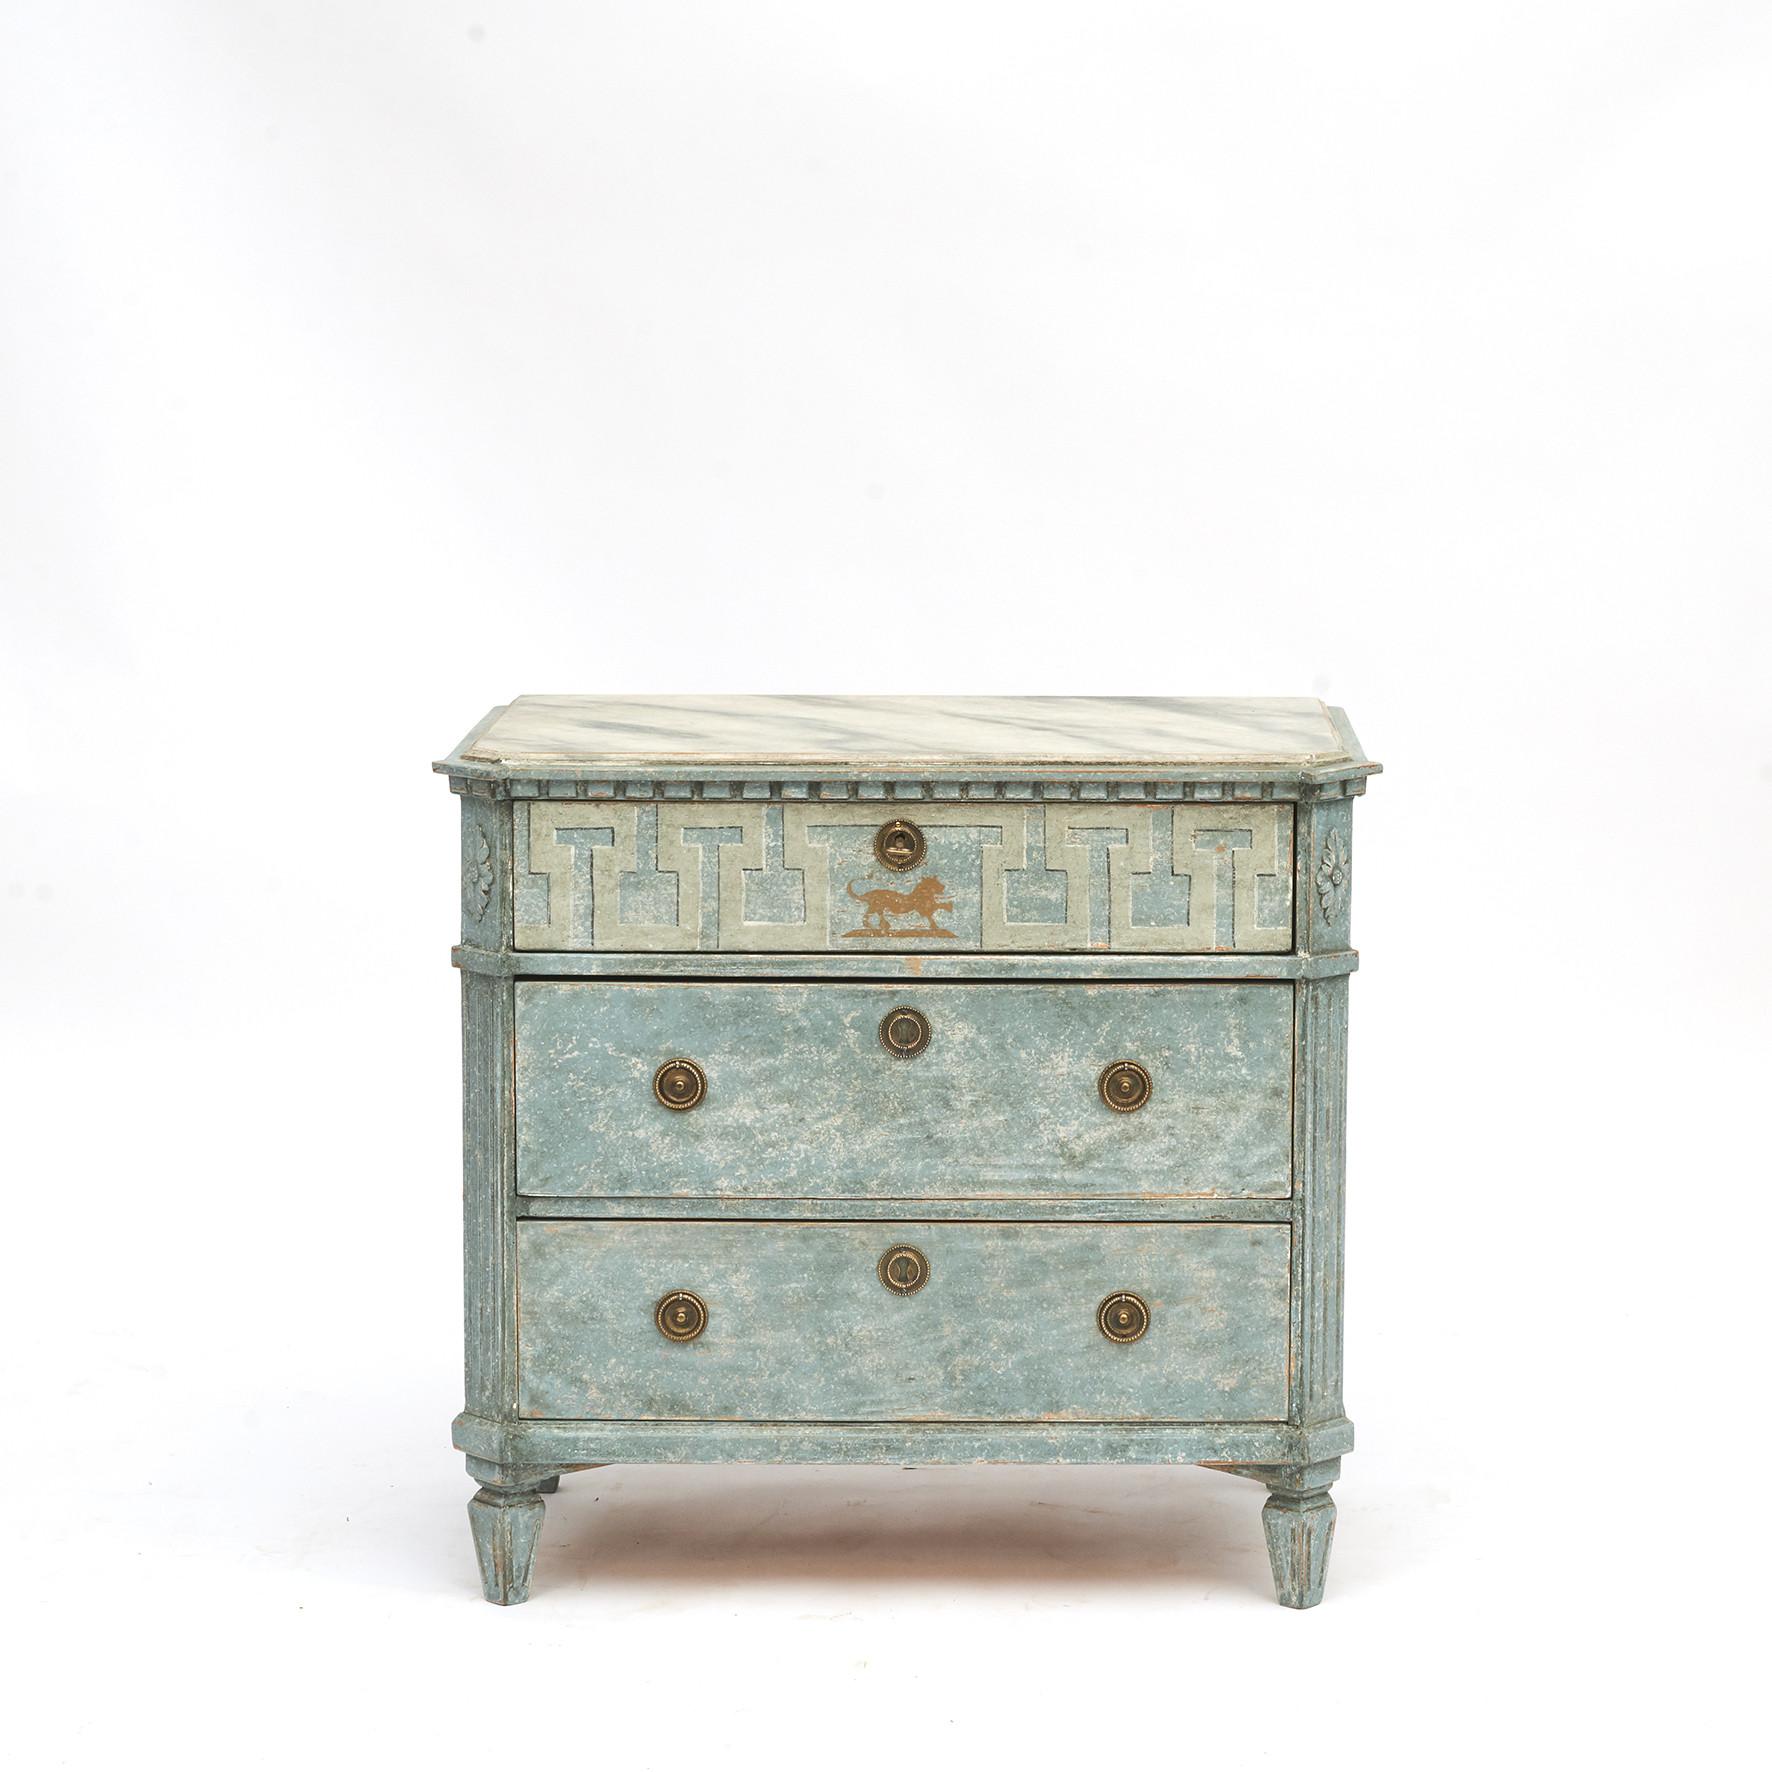 Pair of Swedish Gustavian style chest of drawers.
Each of this pair of Gustavian style painted chests features a rectangular marbled top with canted corners in the front, sitting above an elegant apron adorned with dentil molding.
Three drawers.